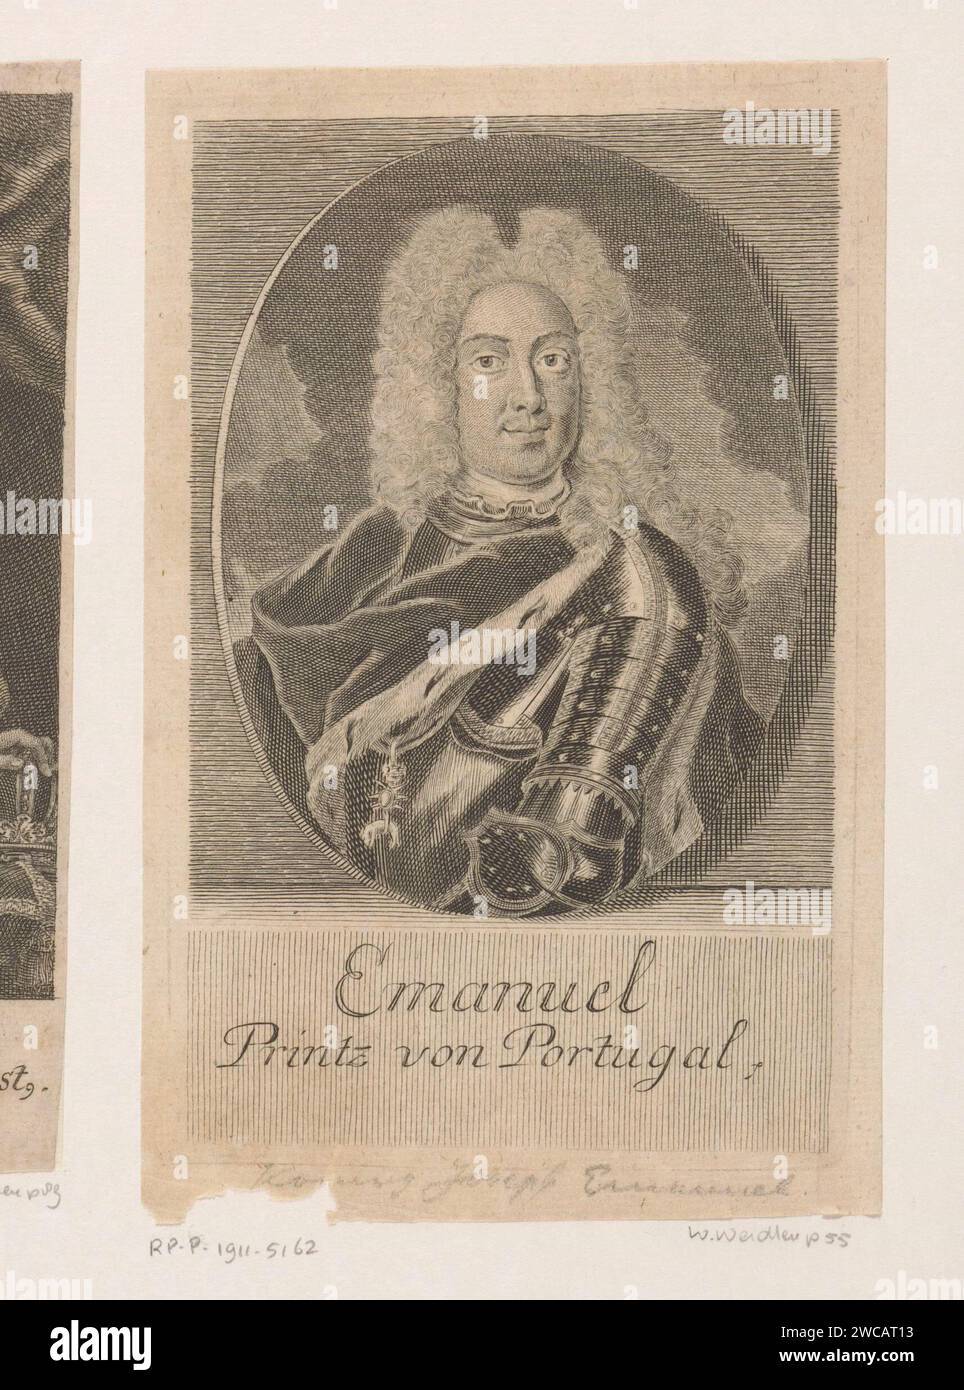 Portrait of Infante Manuel, Graaf van Ourém, Martin Bernigeroth, 1721 - 1767 print  Leipzig paper engraving historical persons. armour. mantle, gown, dress (symbol of sovereignty). knighthood order of the Golden Fleece - insignia of a knighthood order, e.g.: badge, chain (with NAME of order) Stock Photo